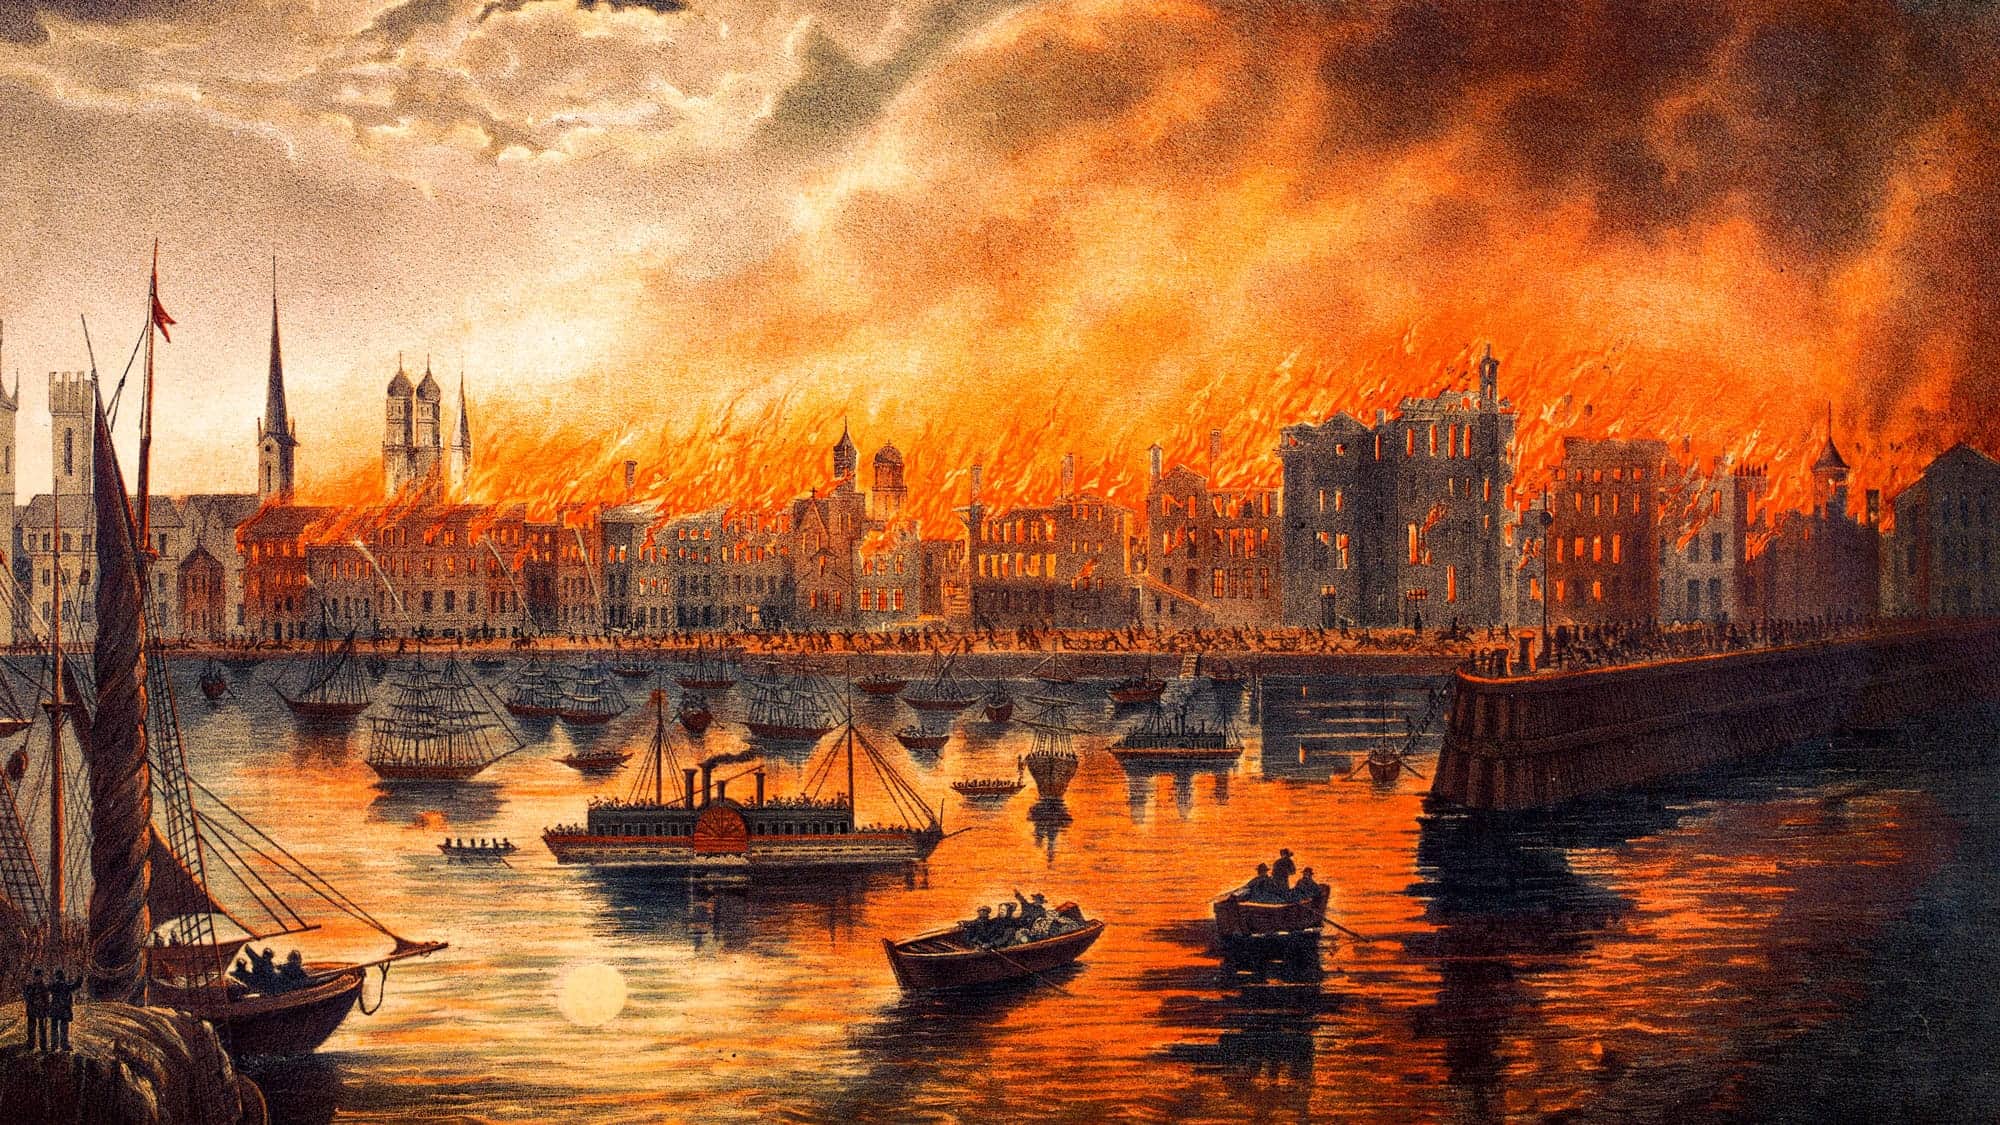 why did the chicago fire of 1871 cause so much damage